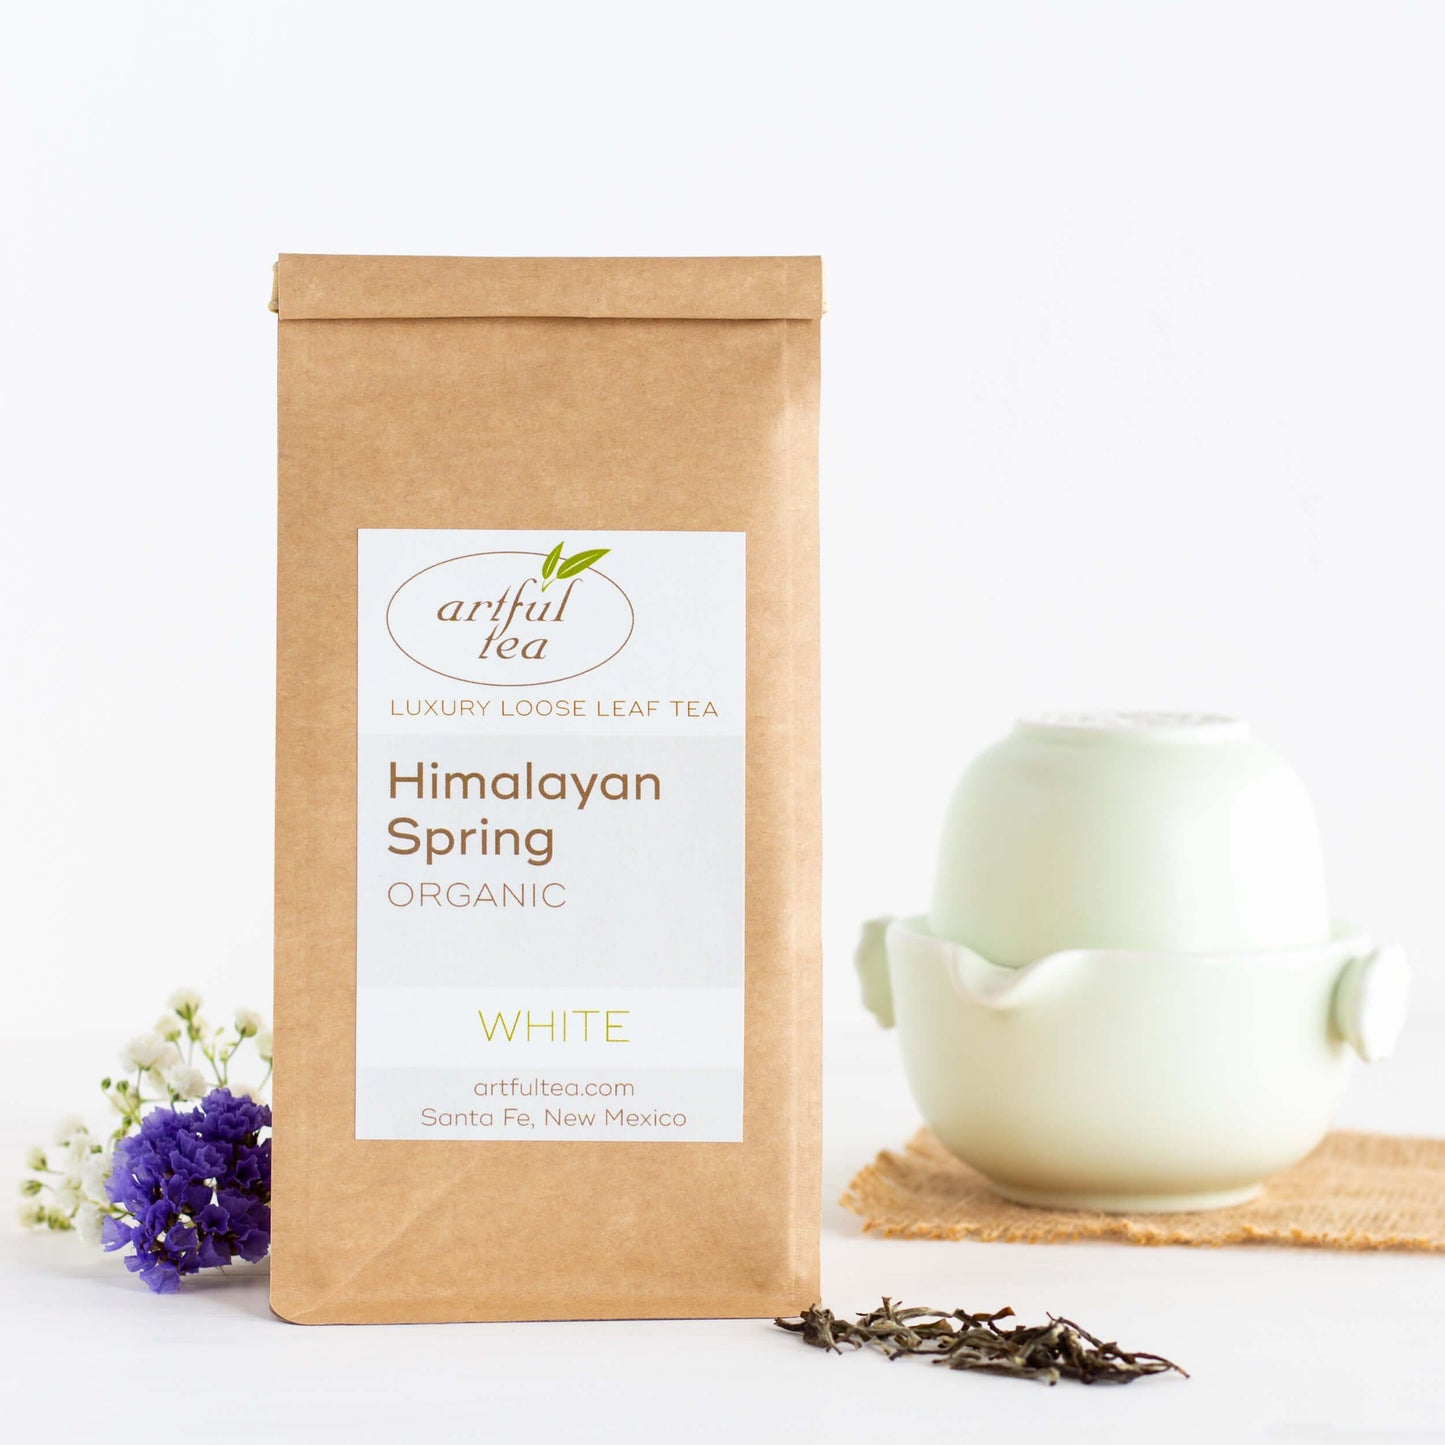 Himalayan Spring Organic White Tea shown packaged in a kraft bag, with a small pale green teapot and cup set in the background, and loose tea leaves in the foreground.